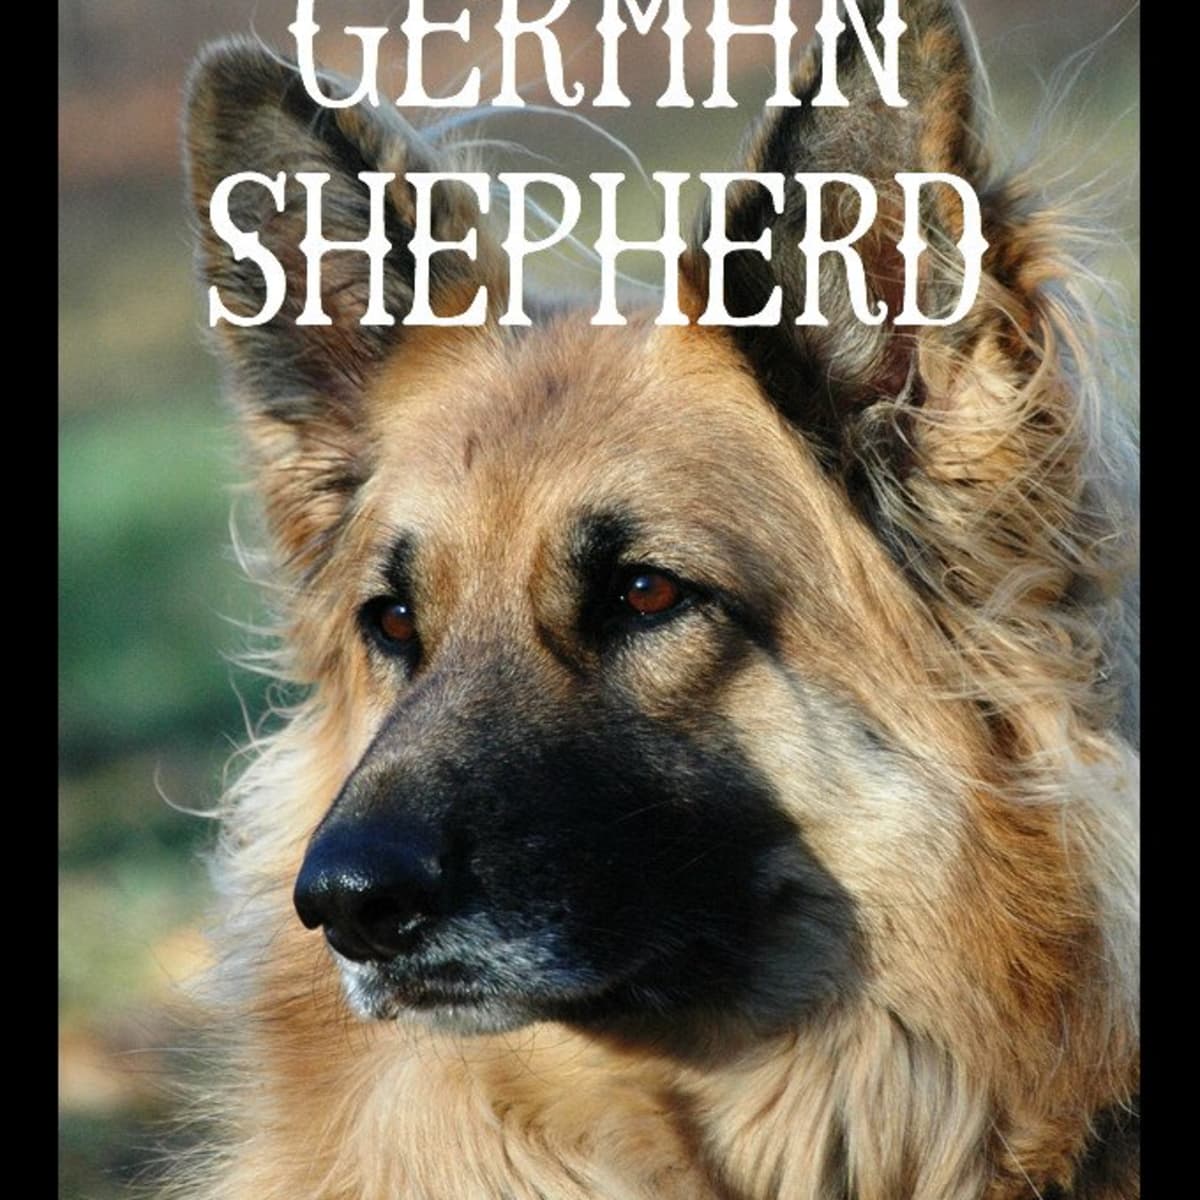 are german shepherds good outdoor dogs